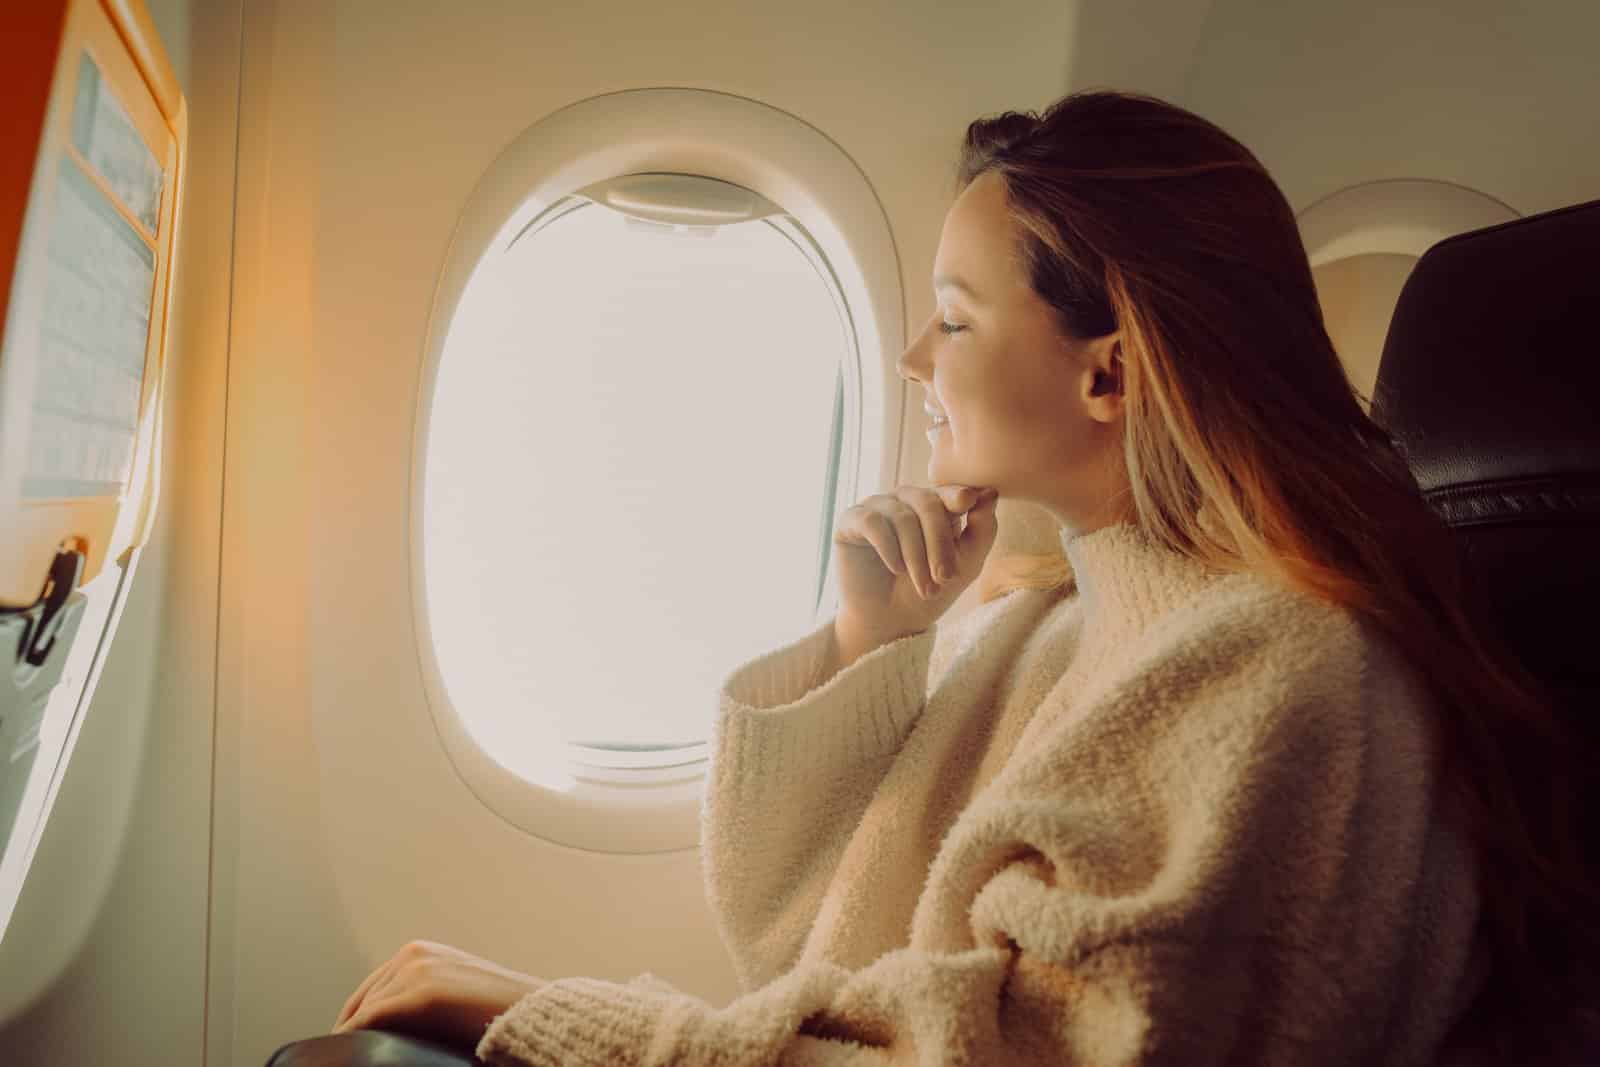 <p class="wp-caption-text">Image Credit: Shutterstock / More Than Production</p>  <p><span>Use apps and websites that track flight prices and alert you to drops. Booking at the right time can save you hundreds.</span></p>